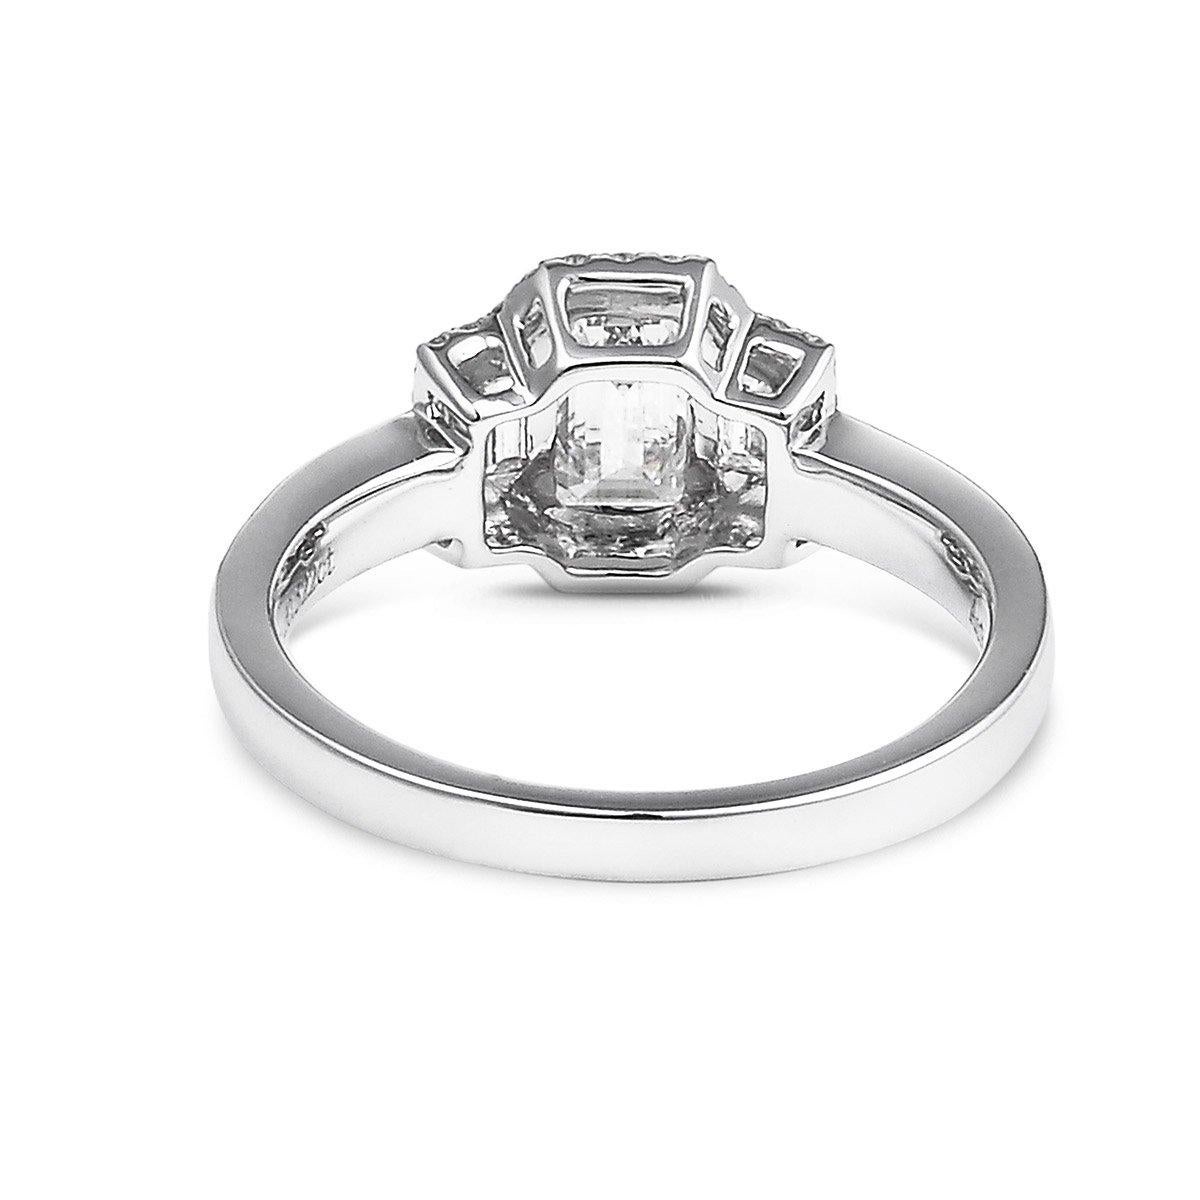 This unique ring is made up of 100% natural untreated white diamonds. The main center stone is 0.63 Carats G-F VS. The perfect solution for an elegant engagement ring. This piece has been expertly crafted using 18K White Gold. 

This piece can be